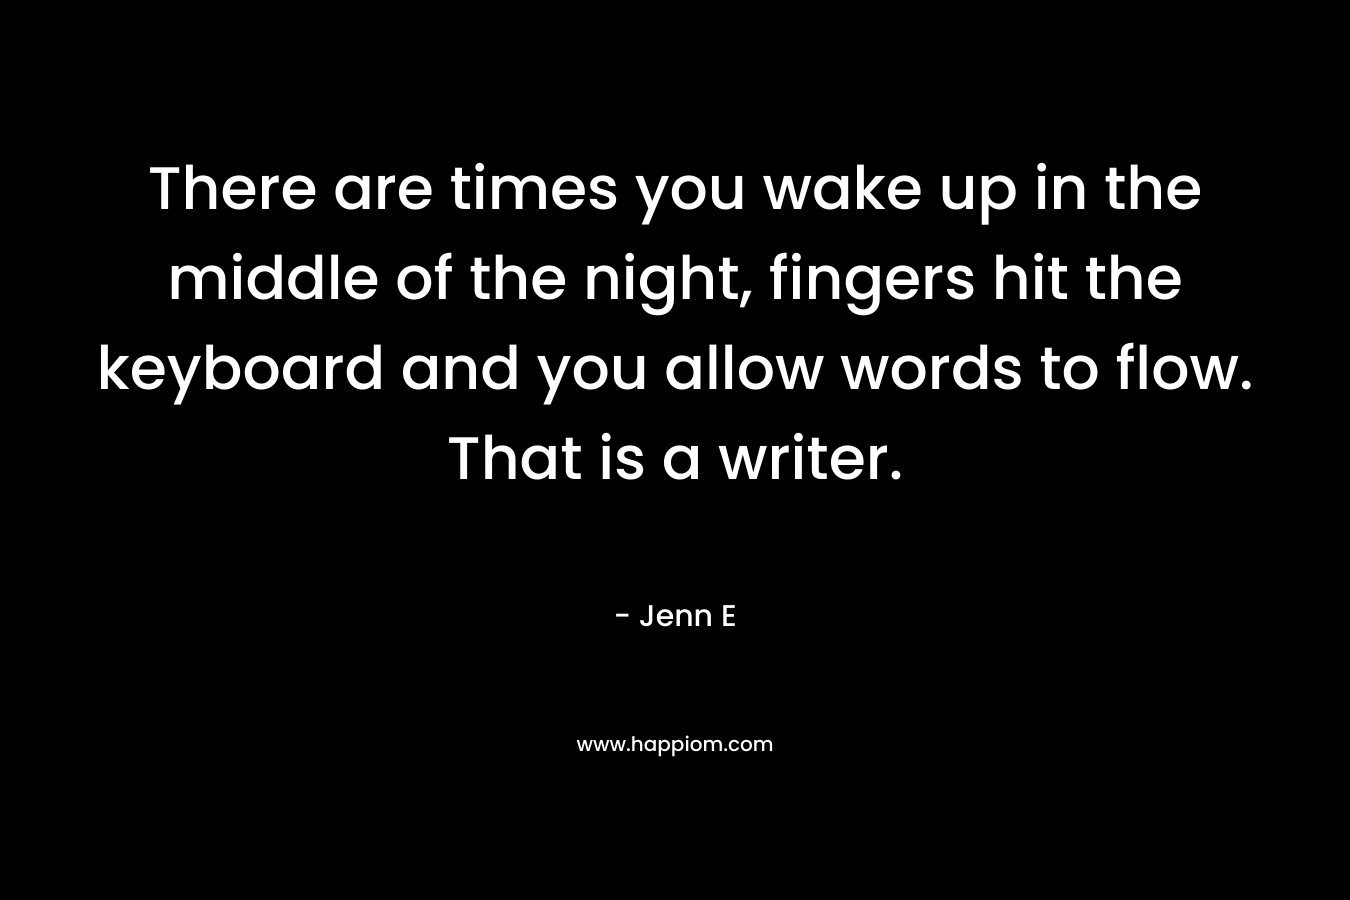 There are times you wake up in the middle of the night, fingers hit the keyboard and you allow words to flow. That is a writer. – Jenn E